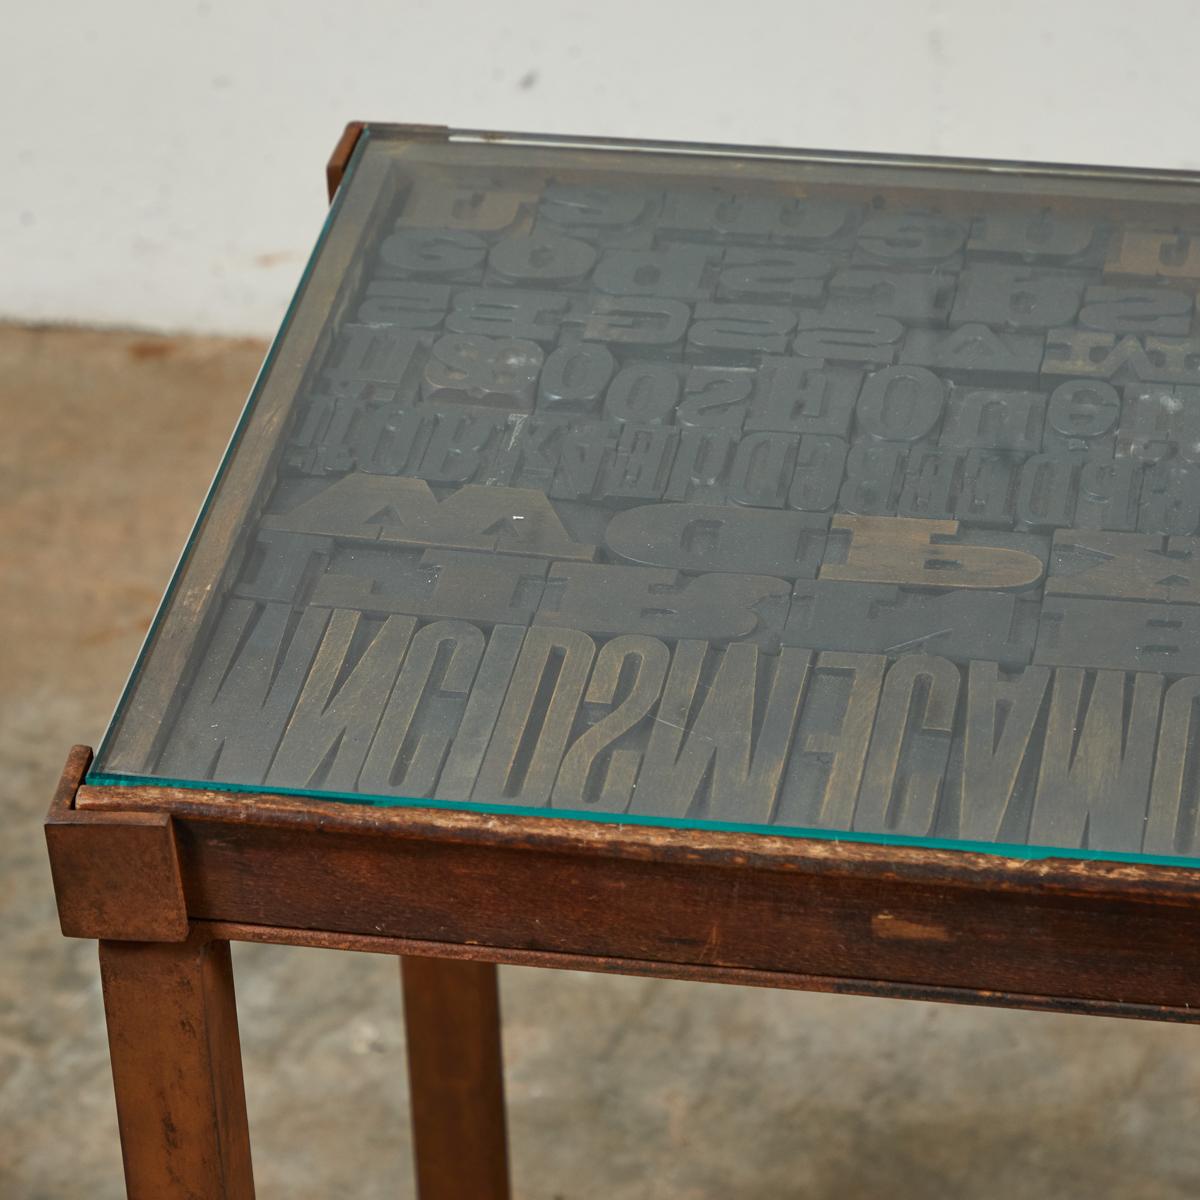 Late 19th Century Industrial Typeset Metal Table In Good Condition For Sale In Los Angeles, CA